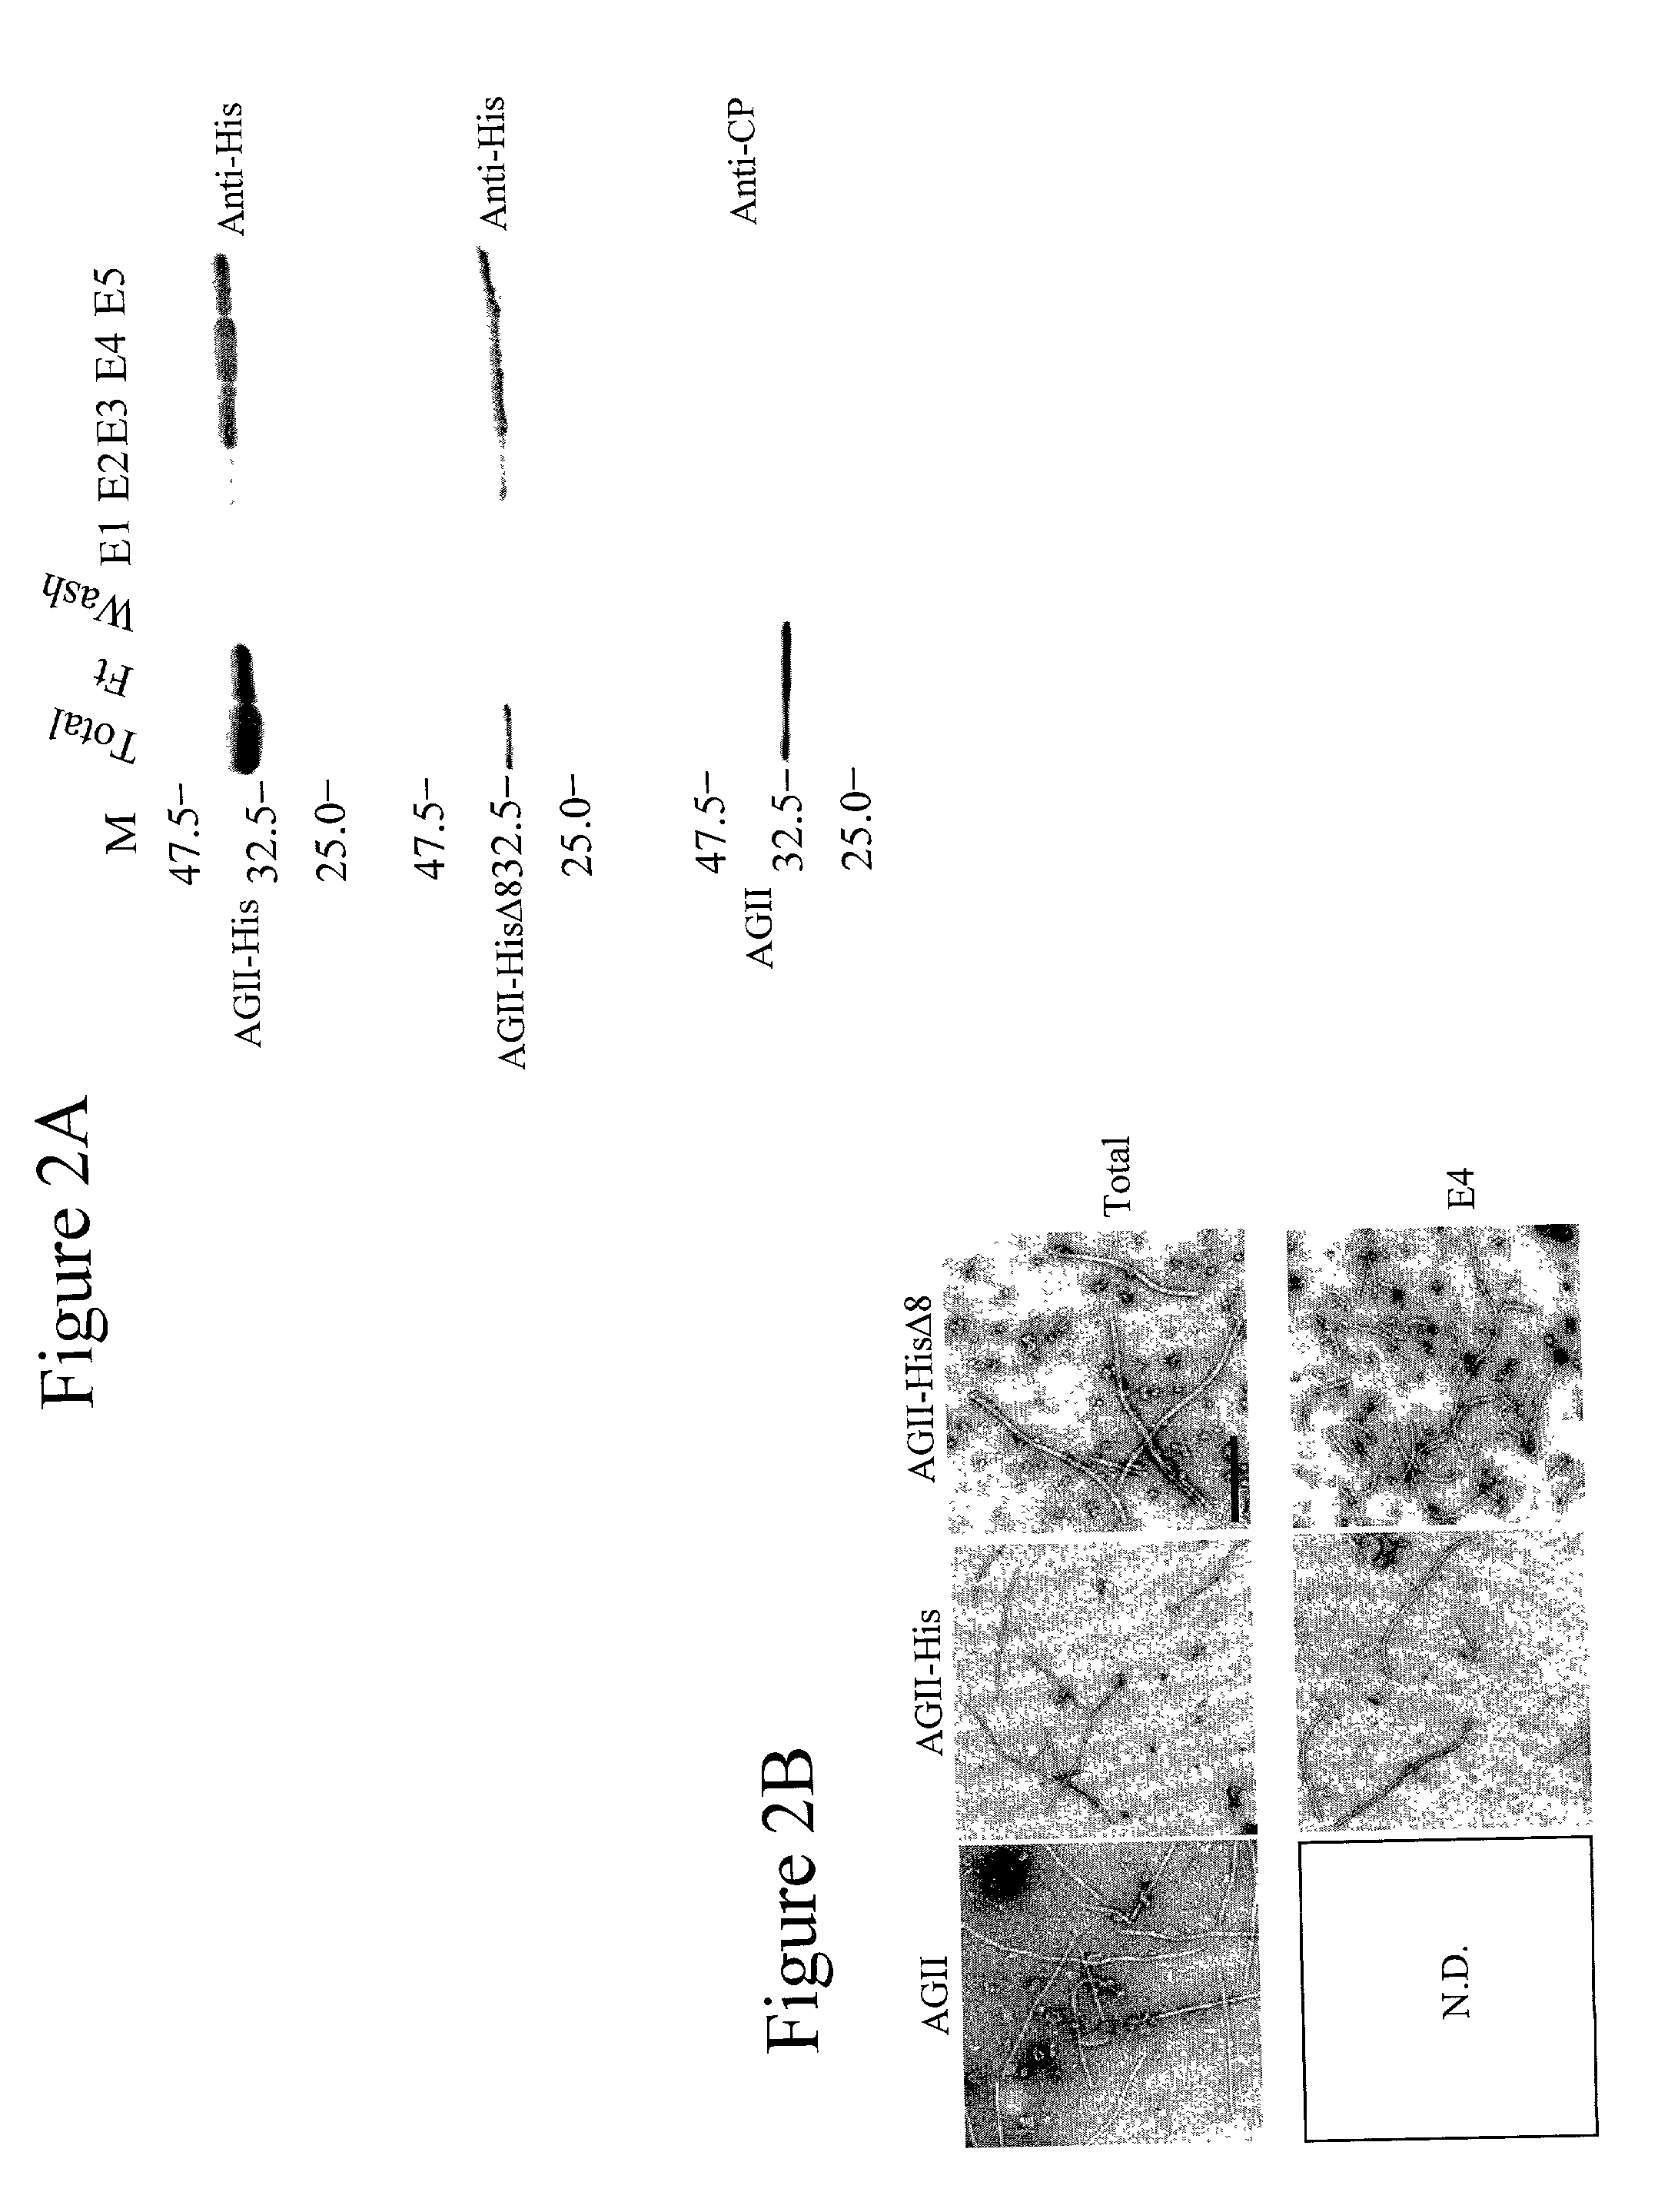 Vectors for expressing heterologous peptides at the amino-terminus of potyvirus coat protein, methods for use thereof, plants infected with same and methods of vaccination using same